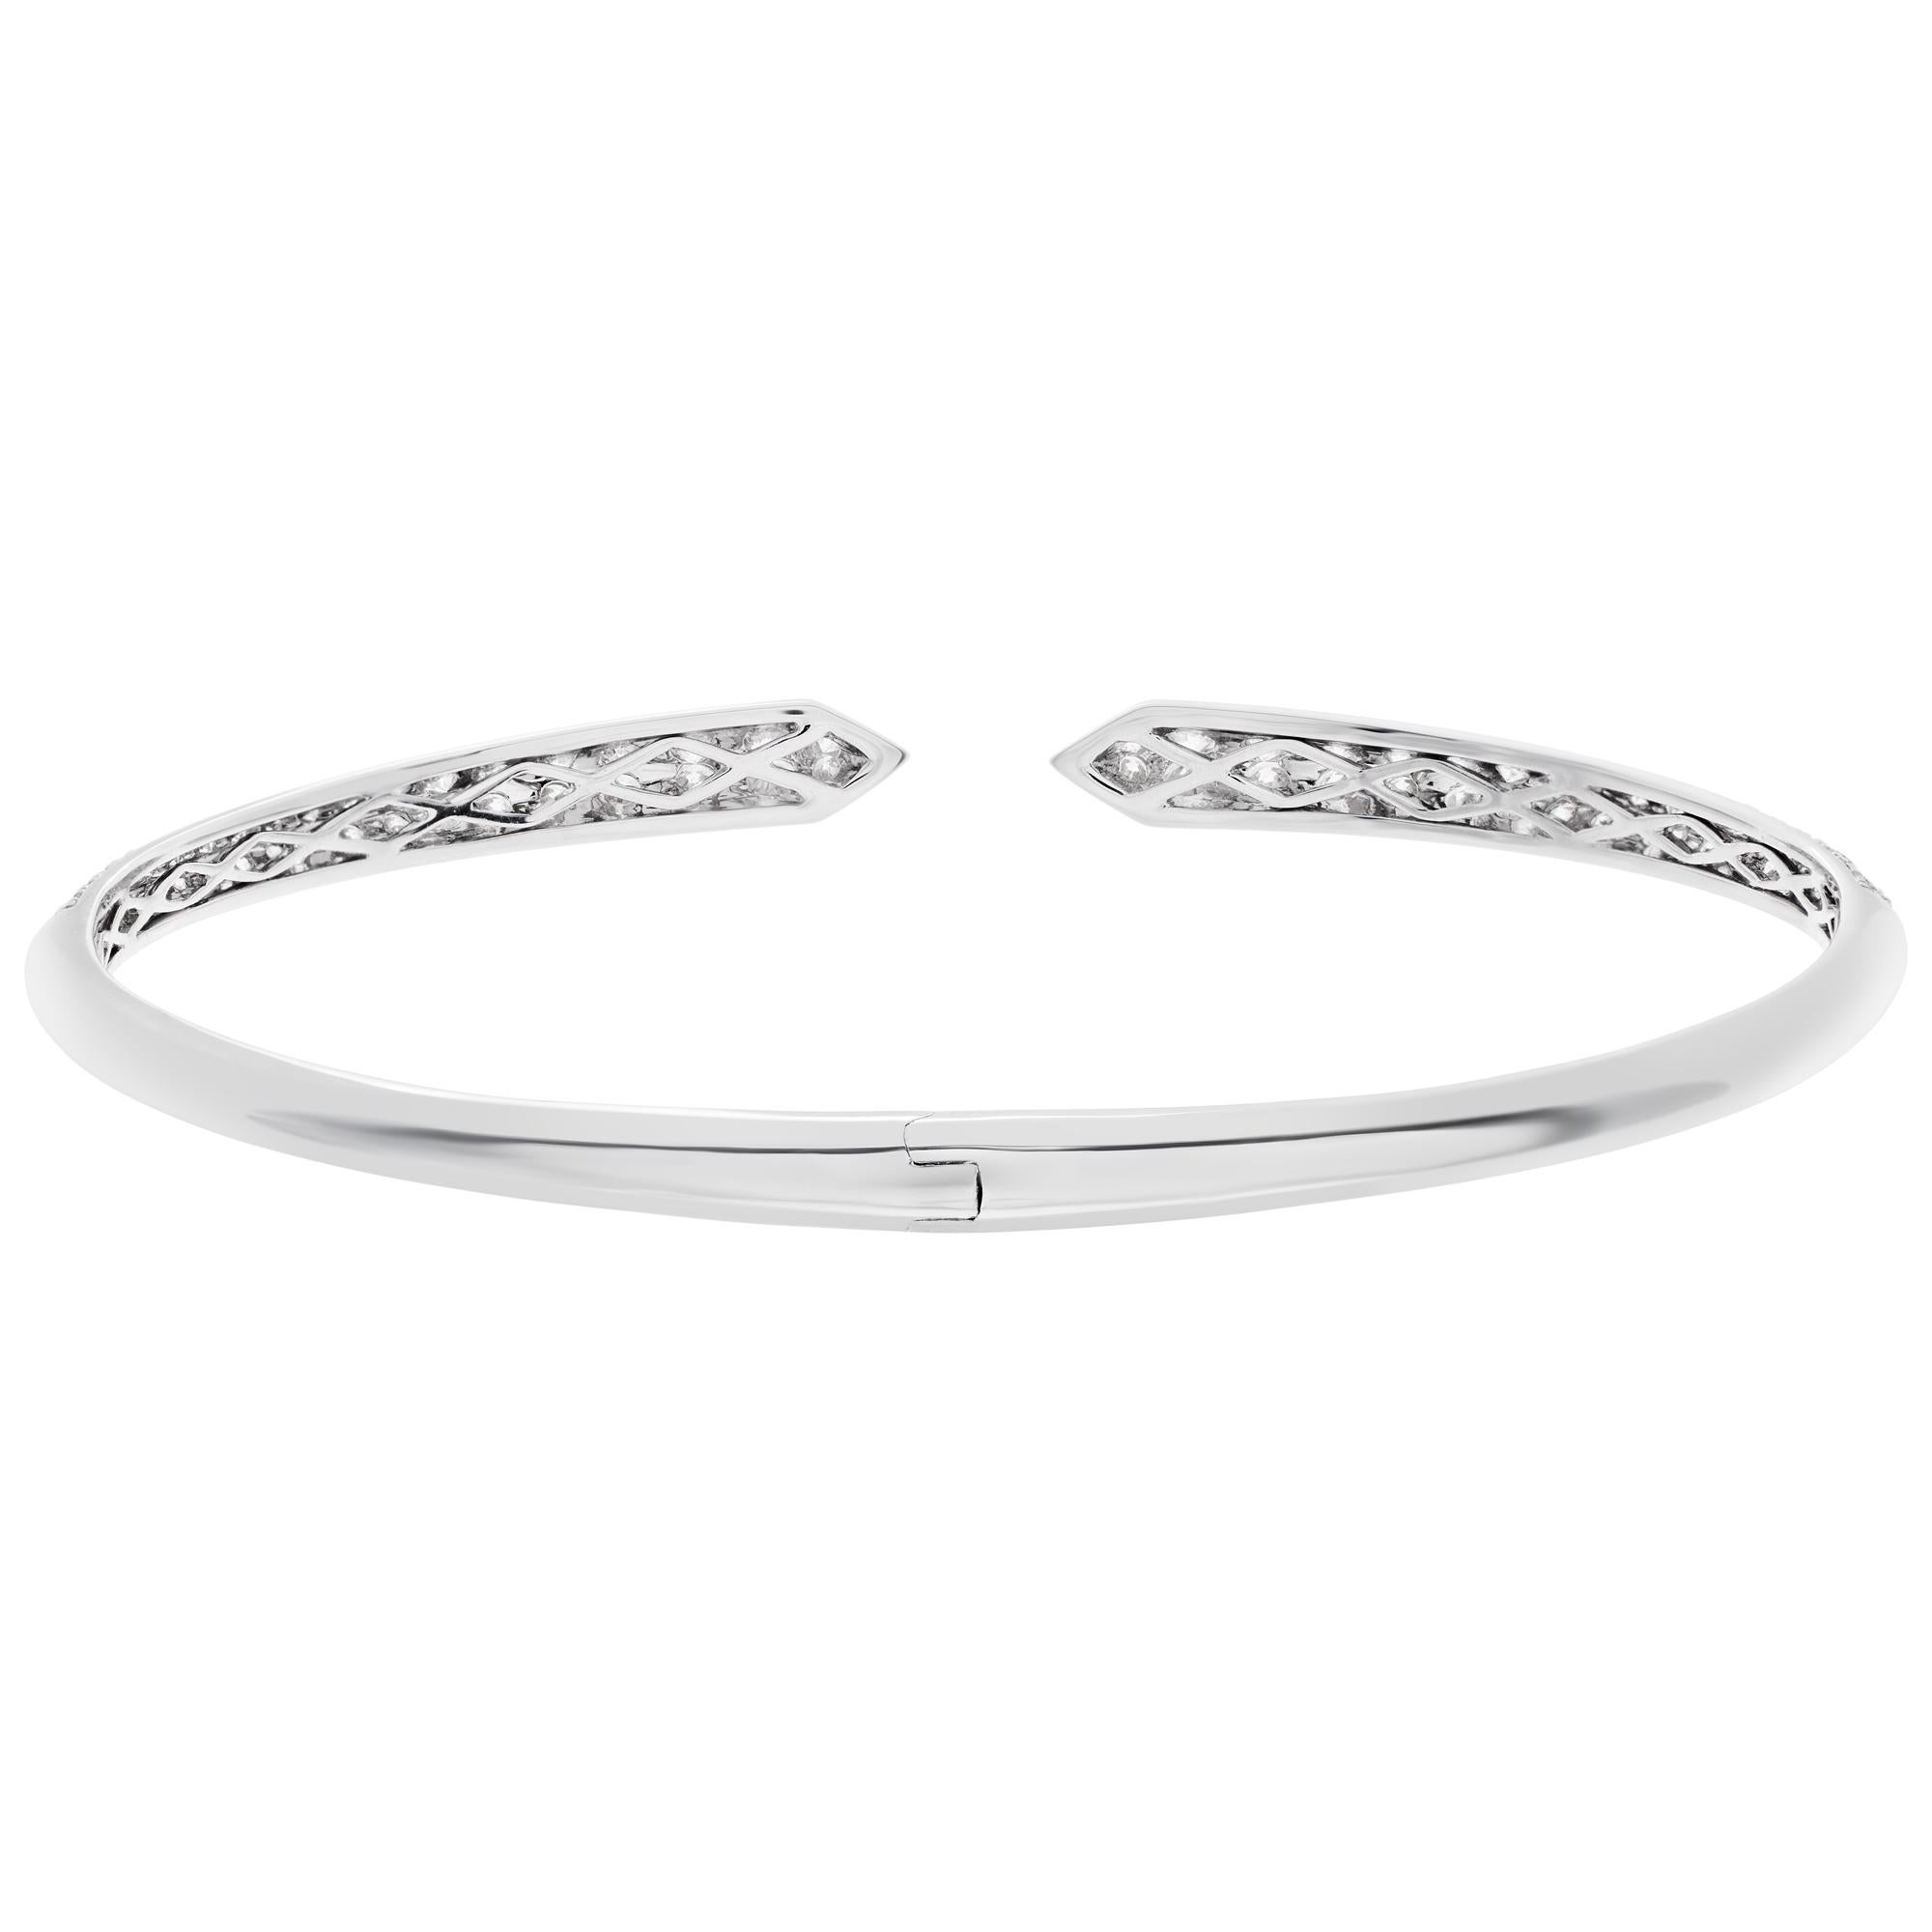 18k White Gold Bangle with 2.36 Carats in Diamonds, Fits Up to Wristt In Excellent Condition For Sale In Surfside, FL